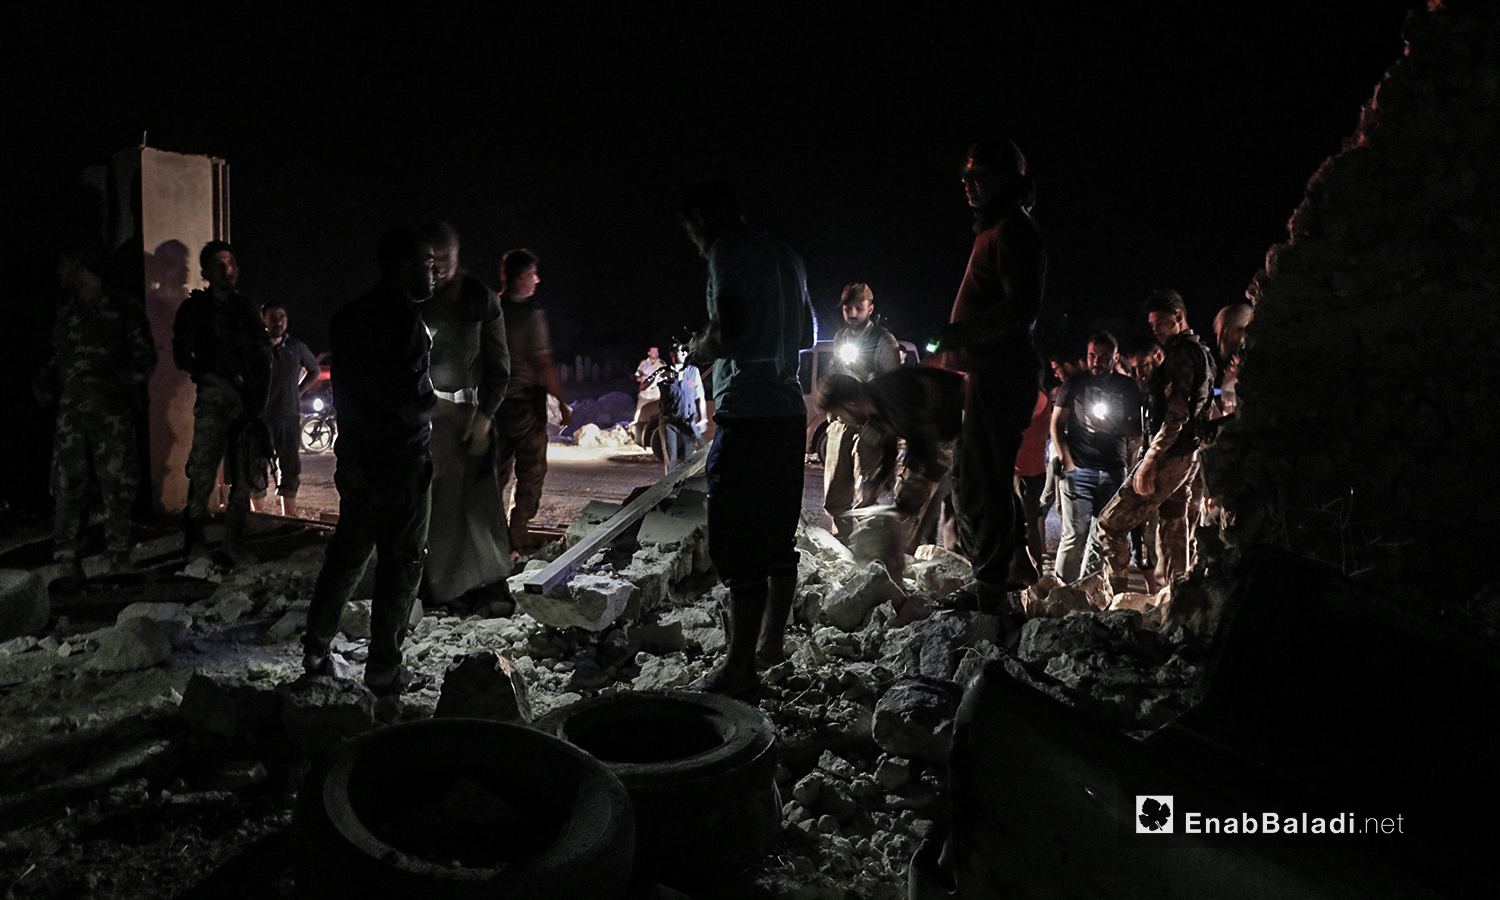 The explosion of an improvised explosive device (IED) in one of the agricultural lands on the outskirts of al-Bab city in the northeastern Aleppo countryside – 27 July 2020 (Enab Baladi / Asim Melhem)